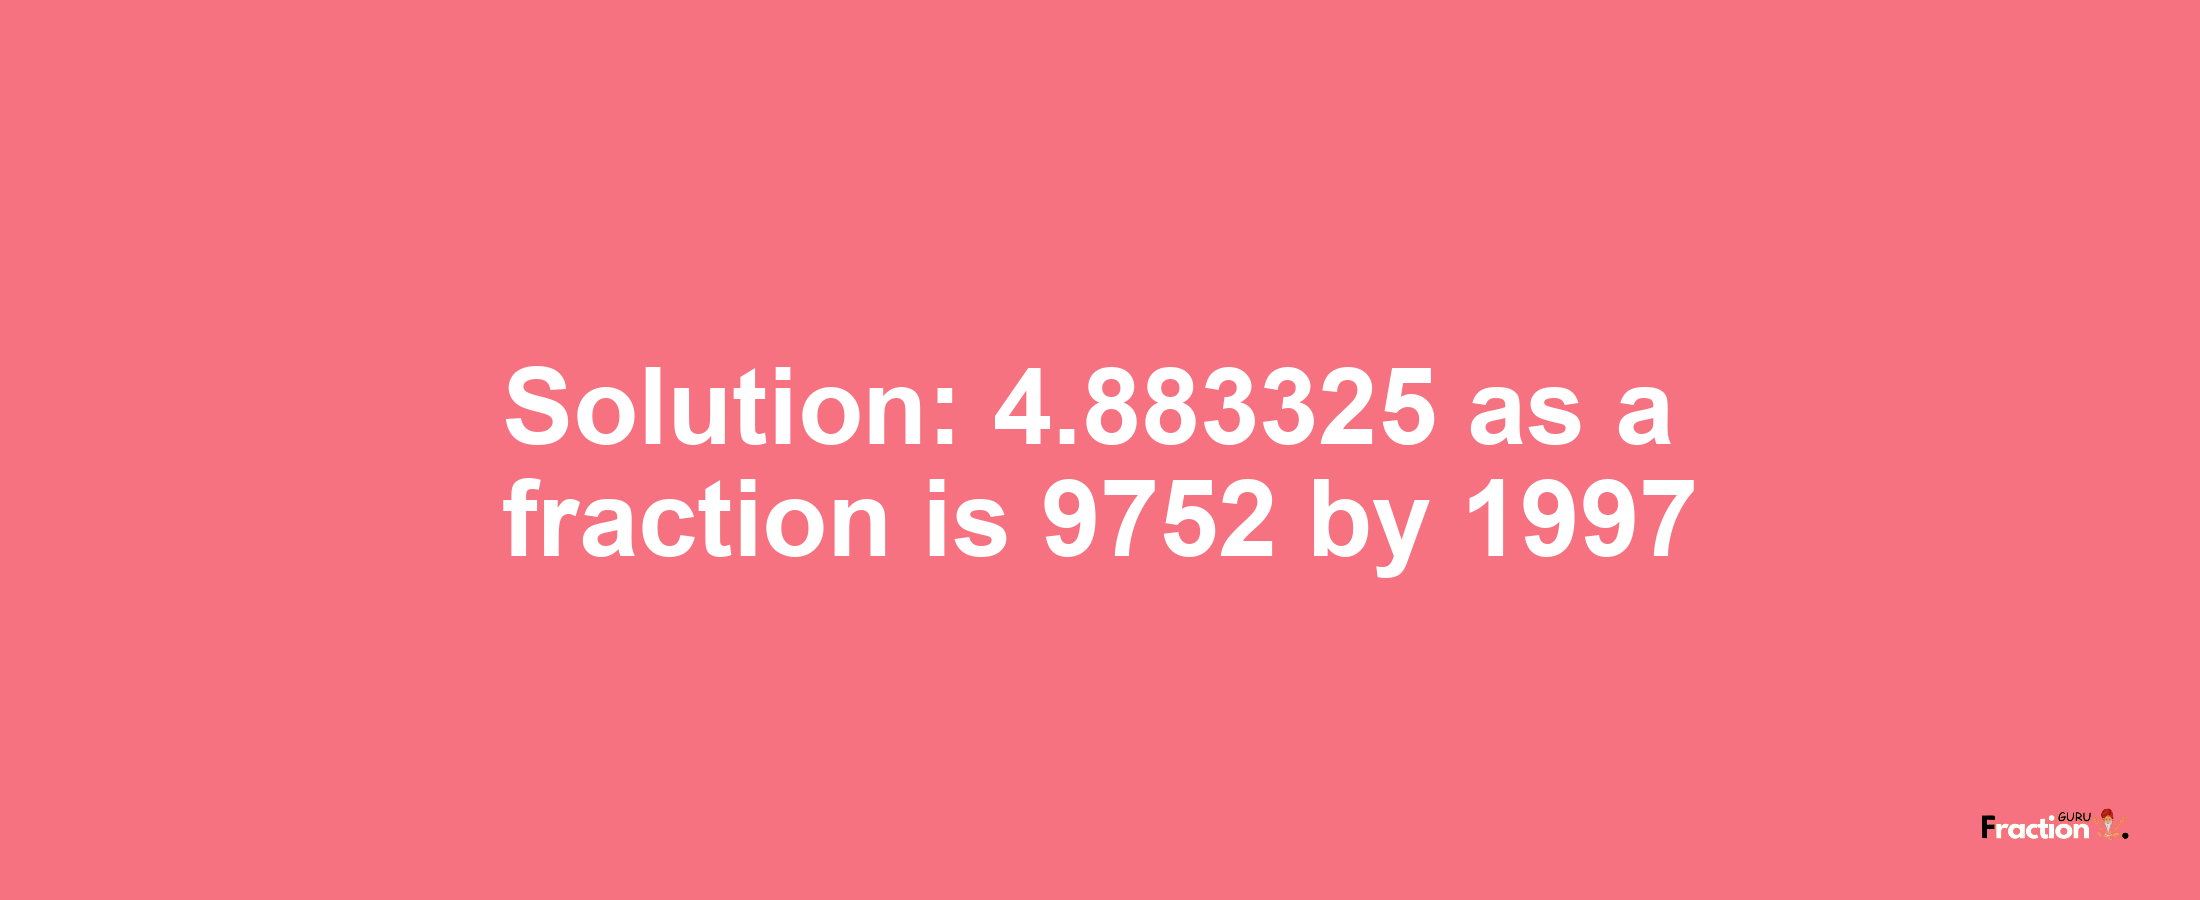 Solution:4.883325 as a fraction is 9752/1997